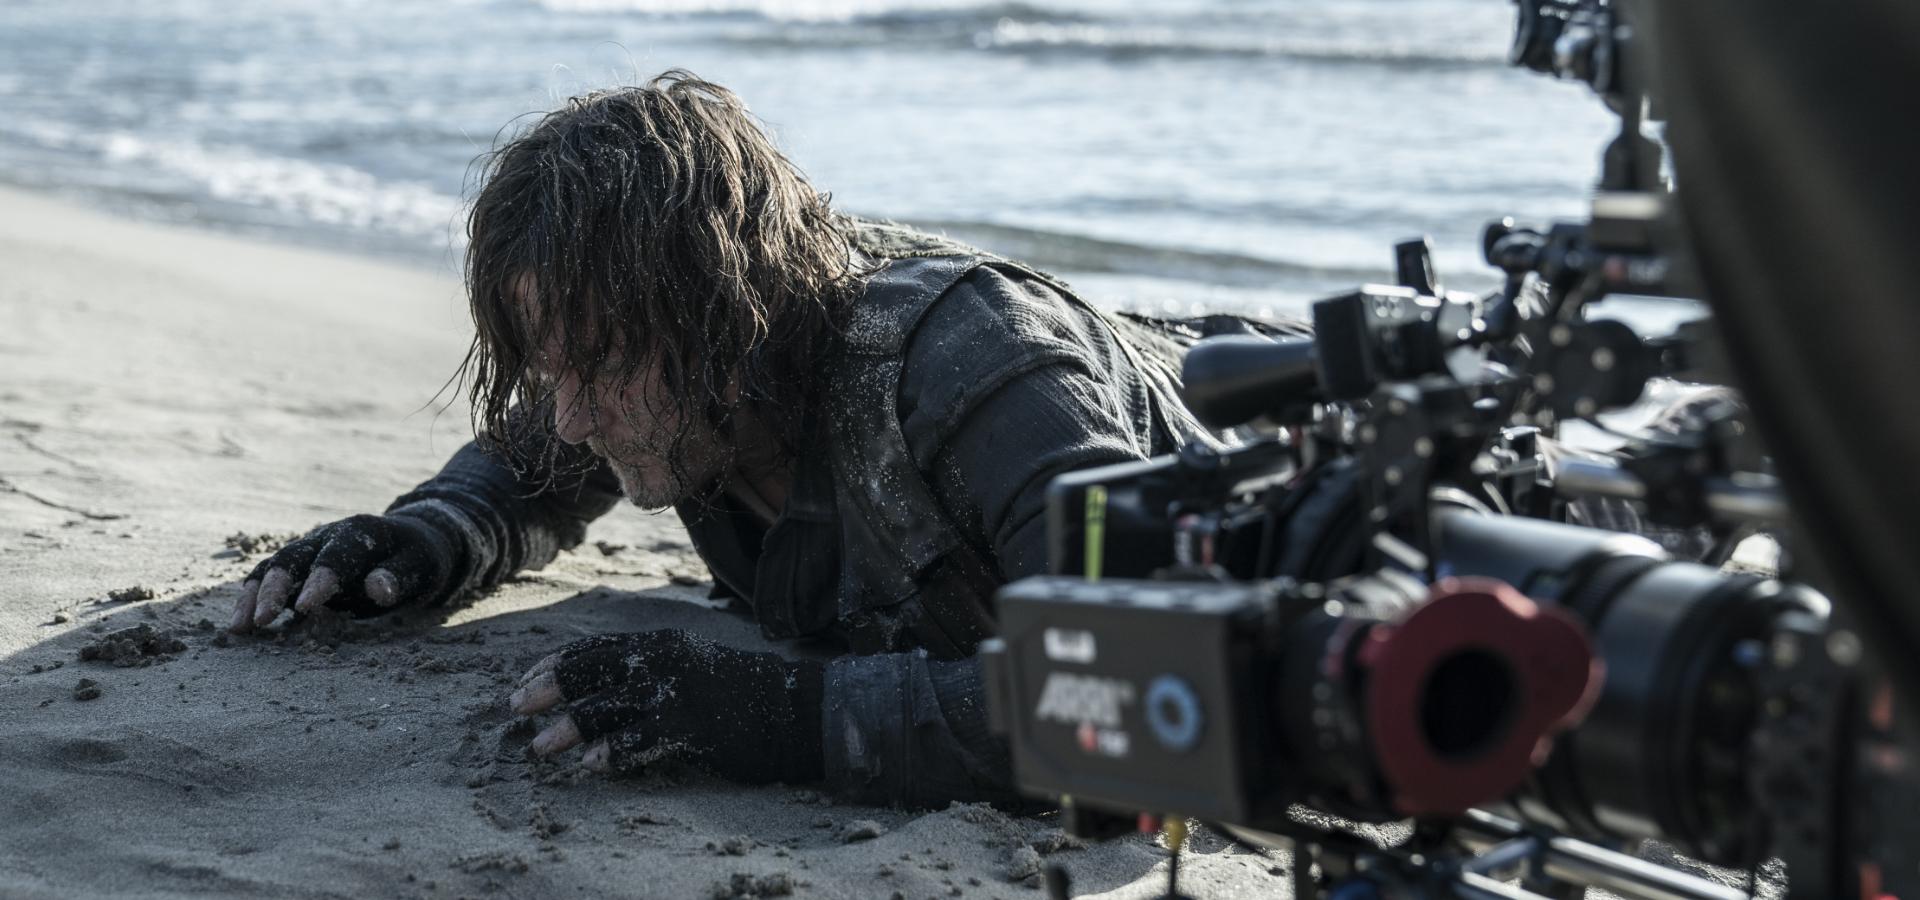 A BTS image of Norman Reedus on the shores of Provence